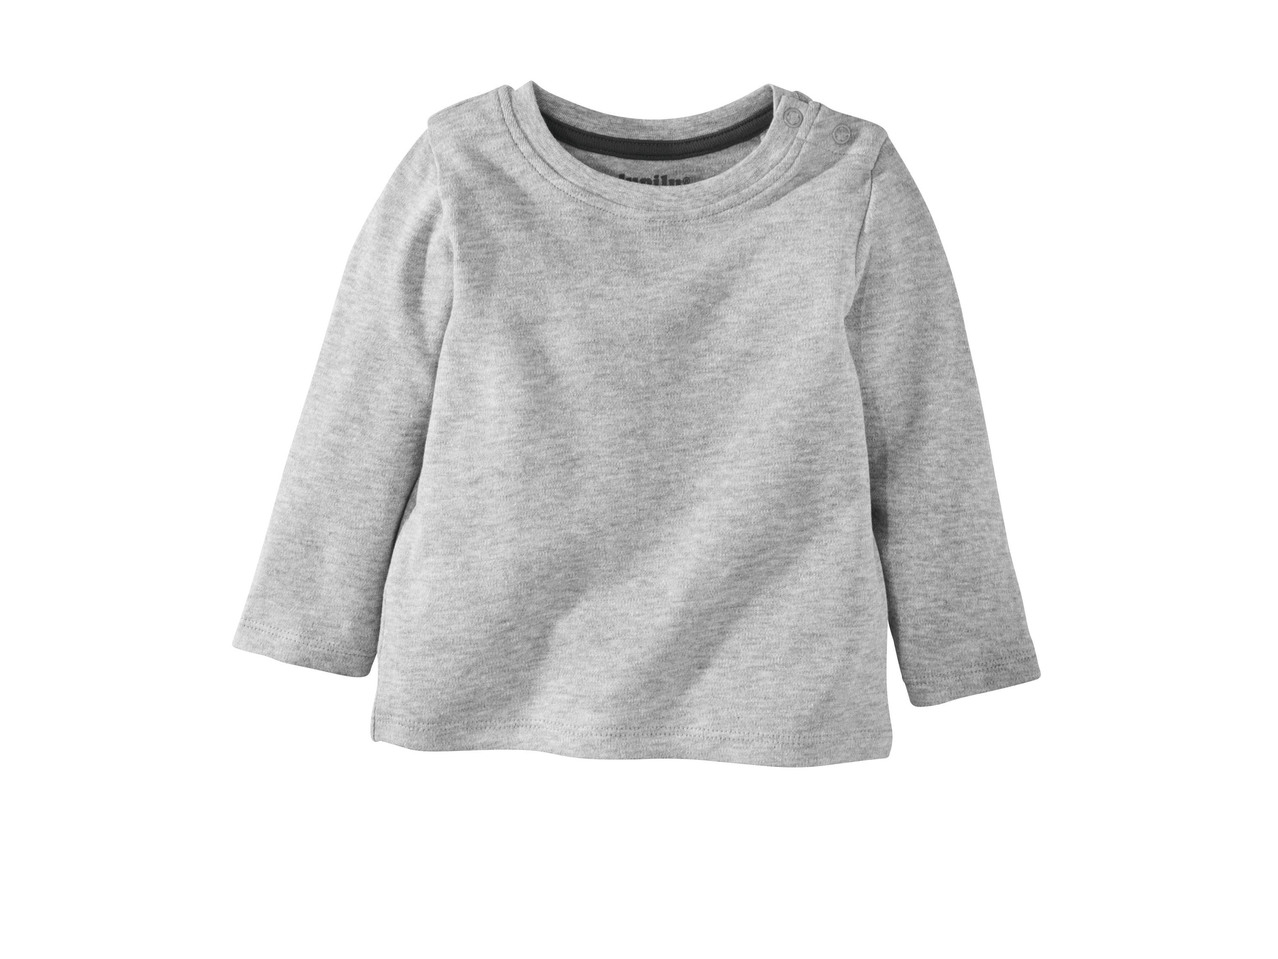 Baby Boys' Long-Sleeved Top, 3 pieces